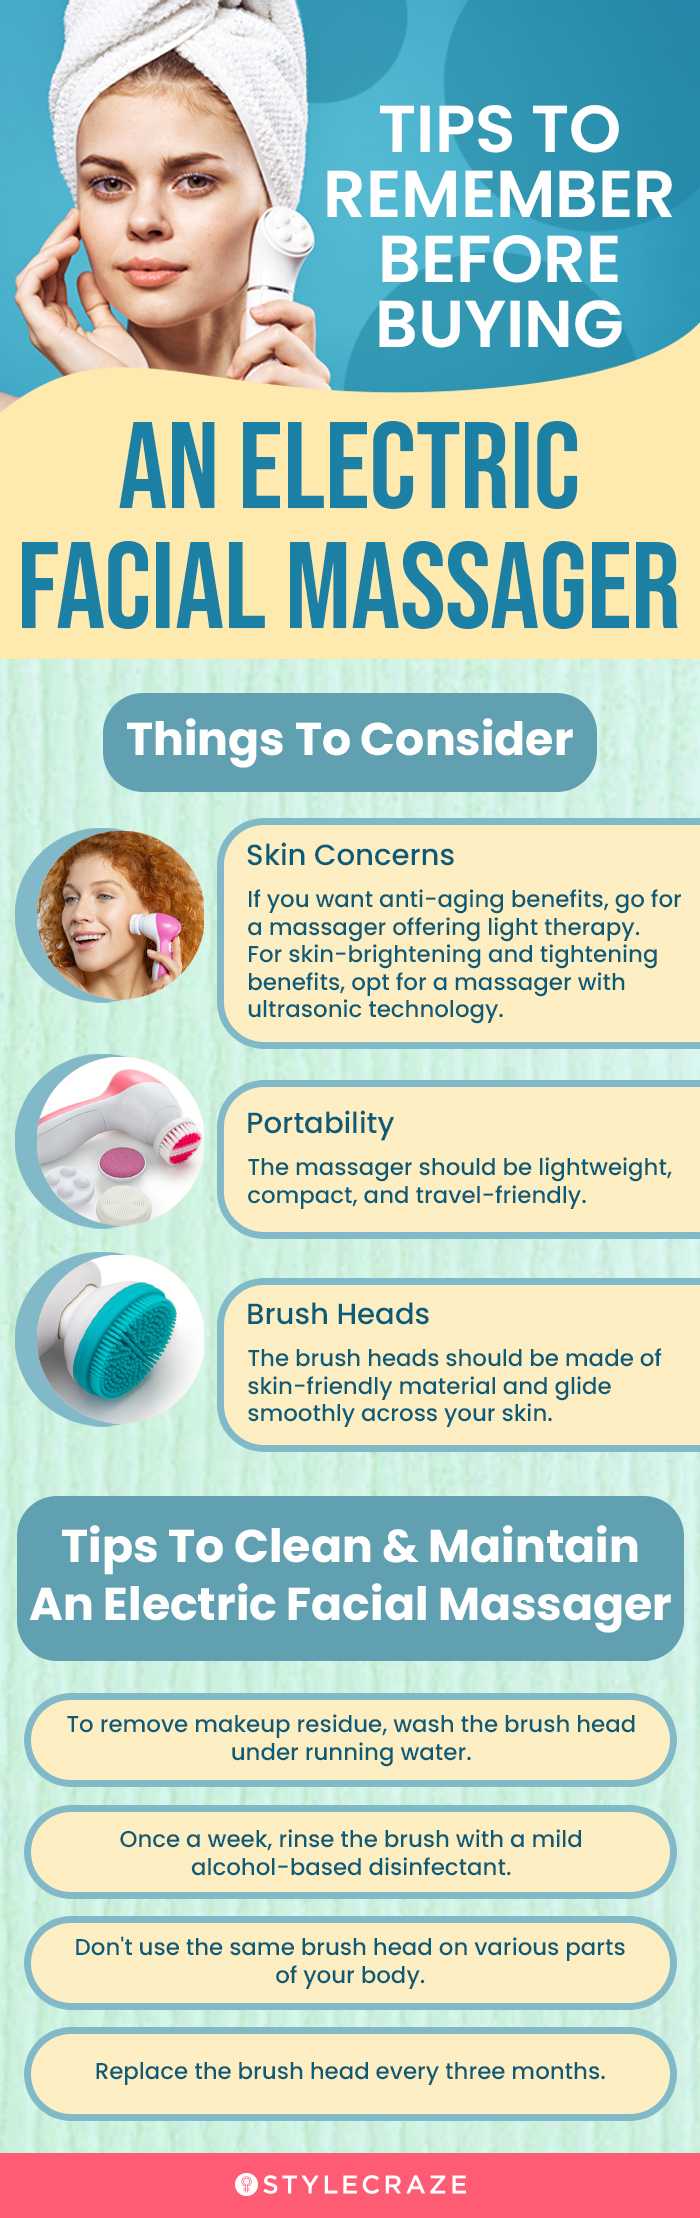 Tips To Remember Before Buying An Electric Facial Massager (infographic)